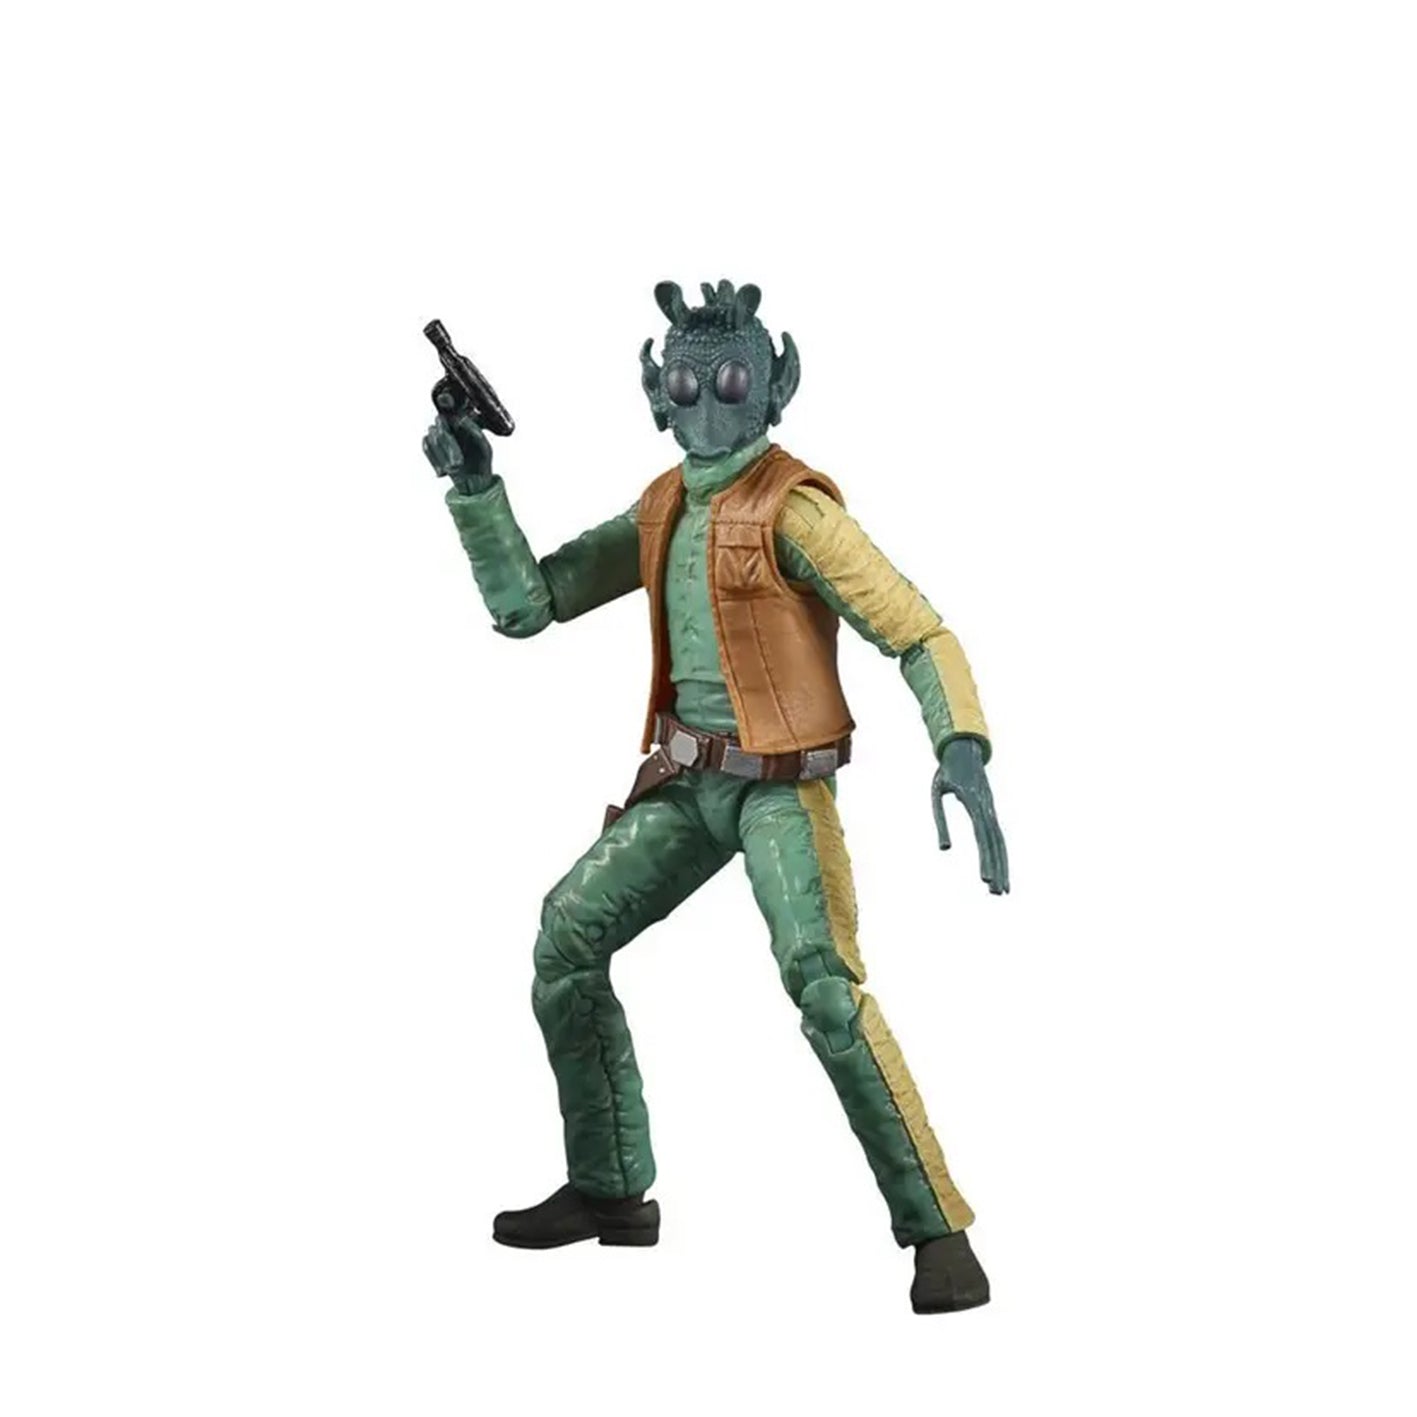 Greedo (The Power of the Force Edition), Star Wars: The Black Series, 6 pulgadas